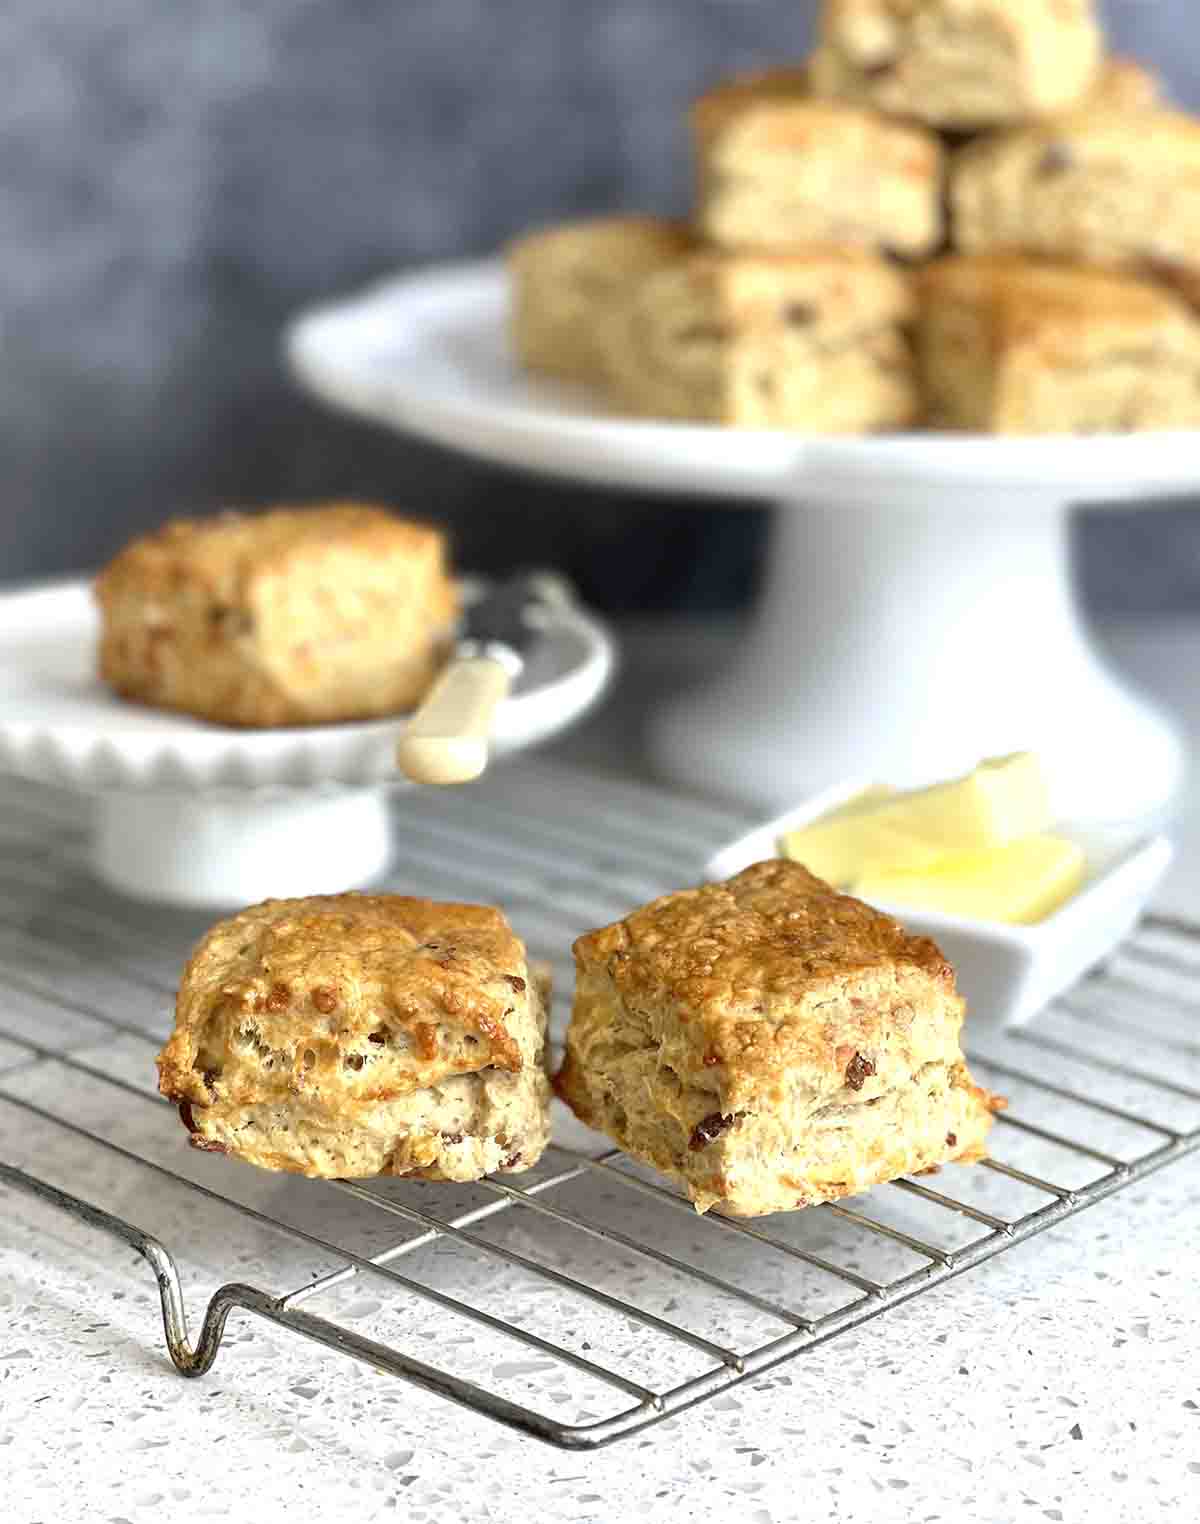  scones on a stand and 2 on a cooling rack.